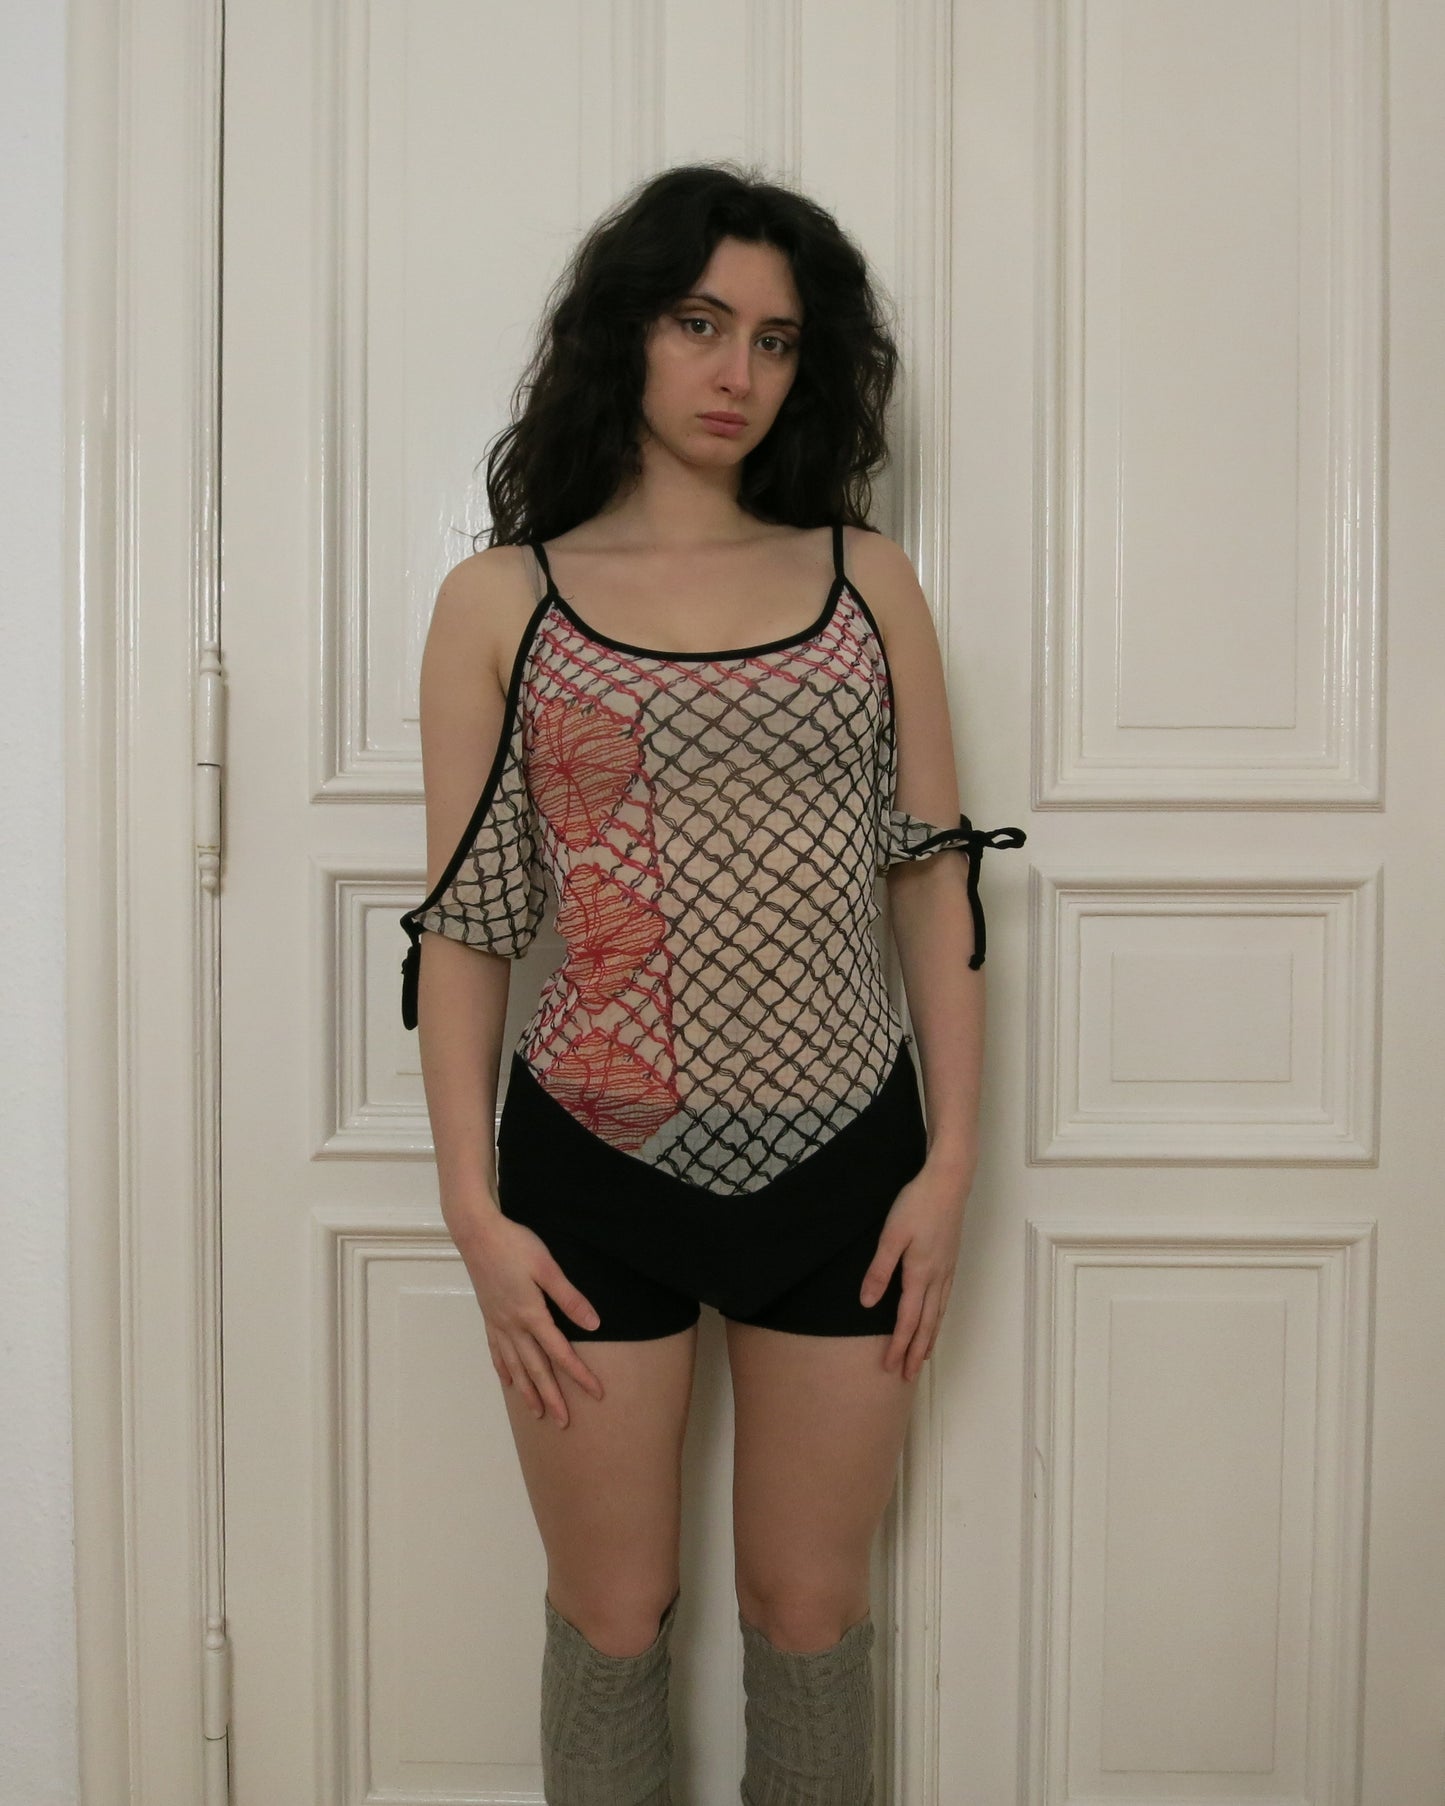 Save the queen mesh top